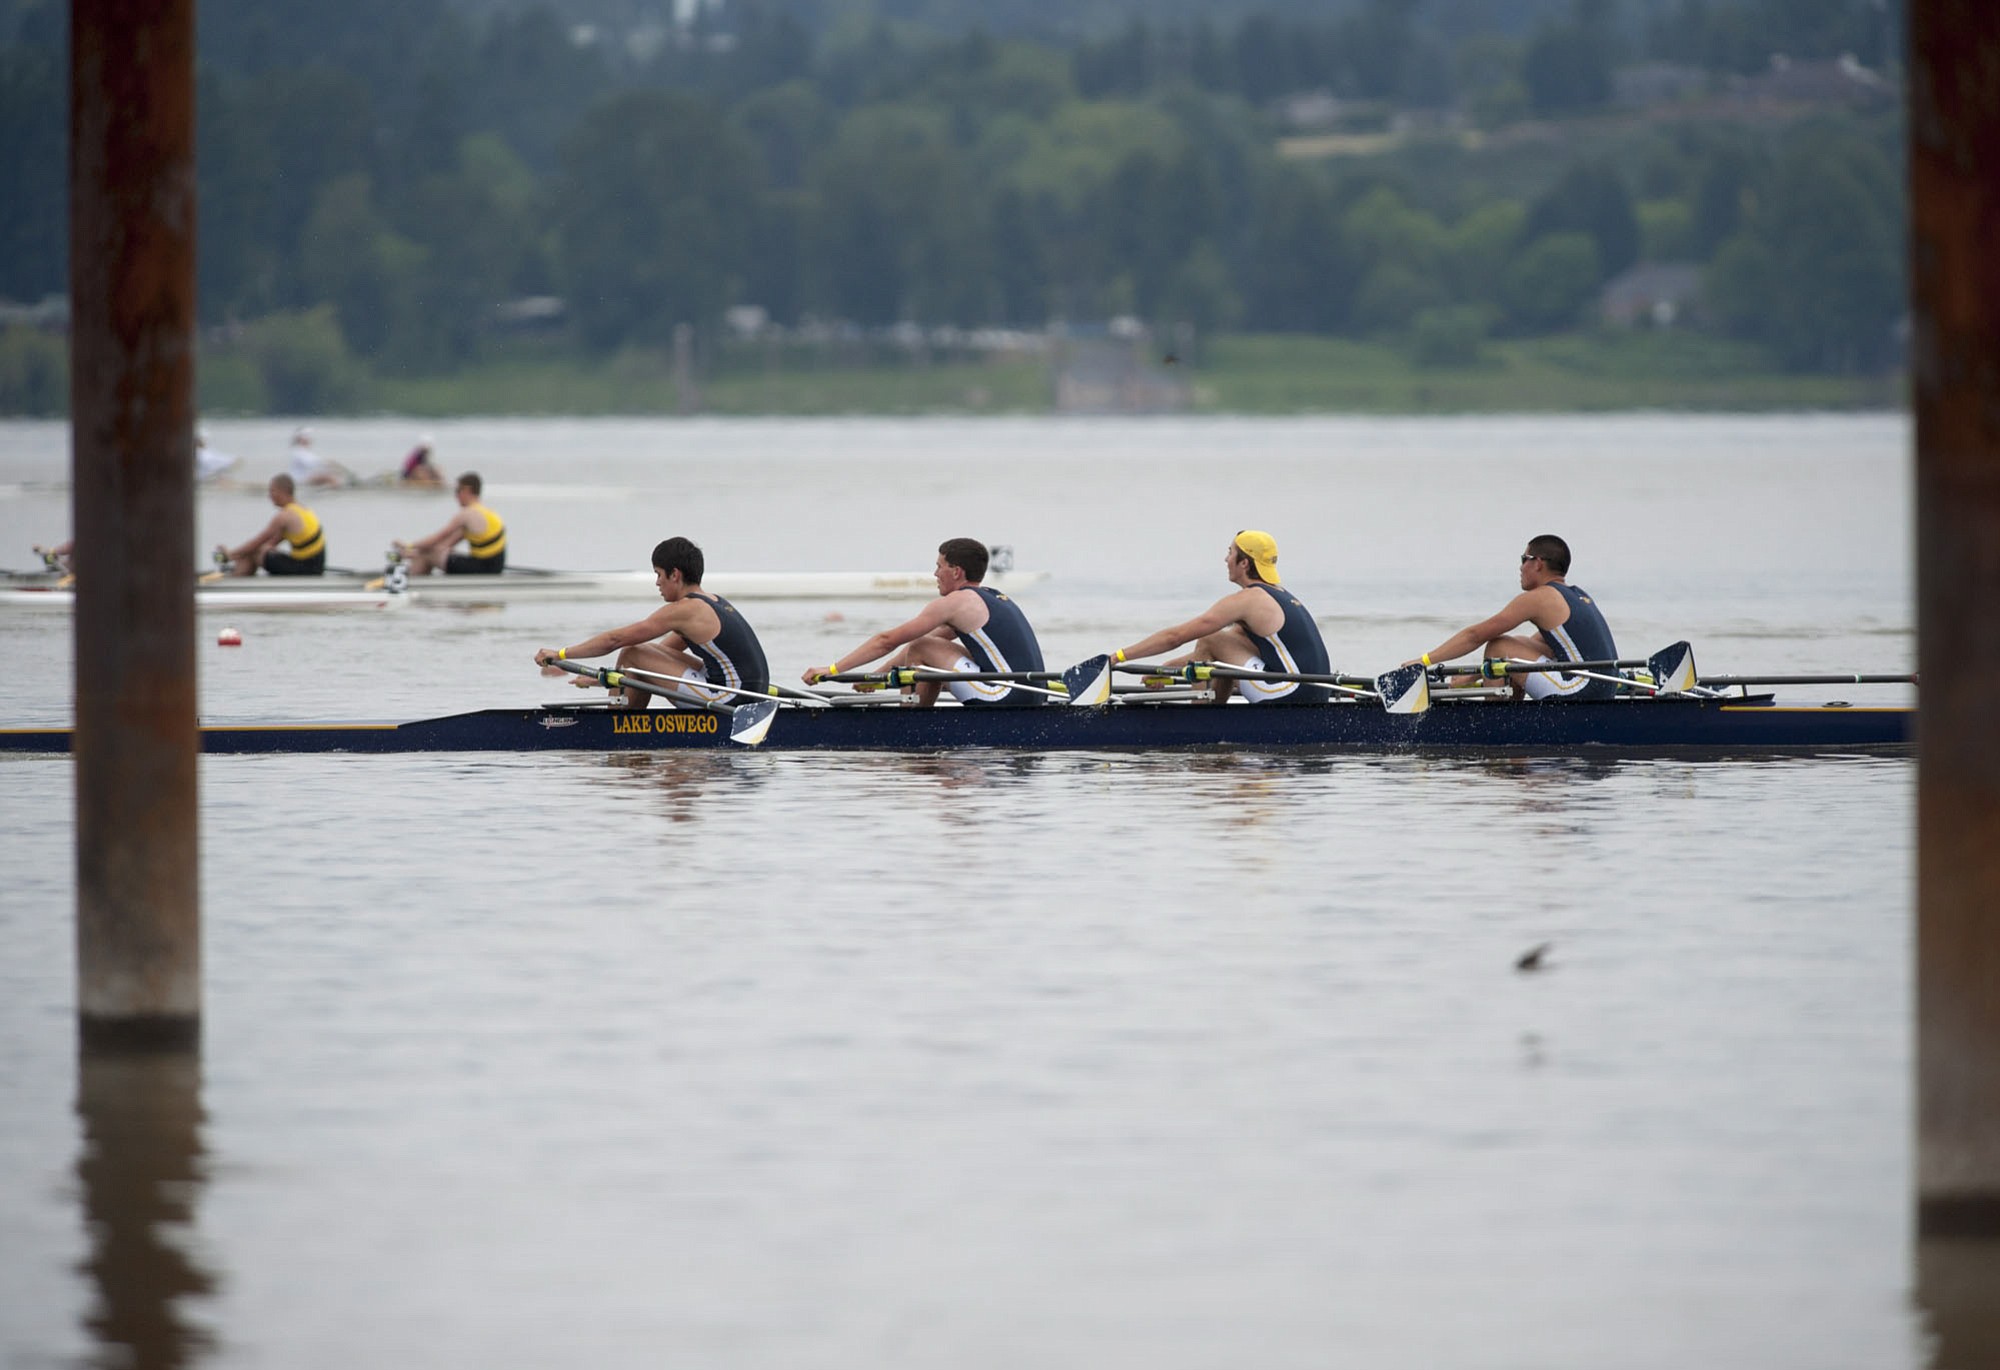 Vancouver Lake Crew’s White qualifies for youth rowing nationals The